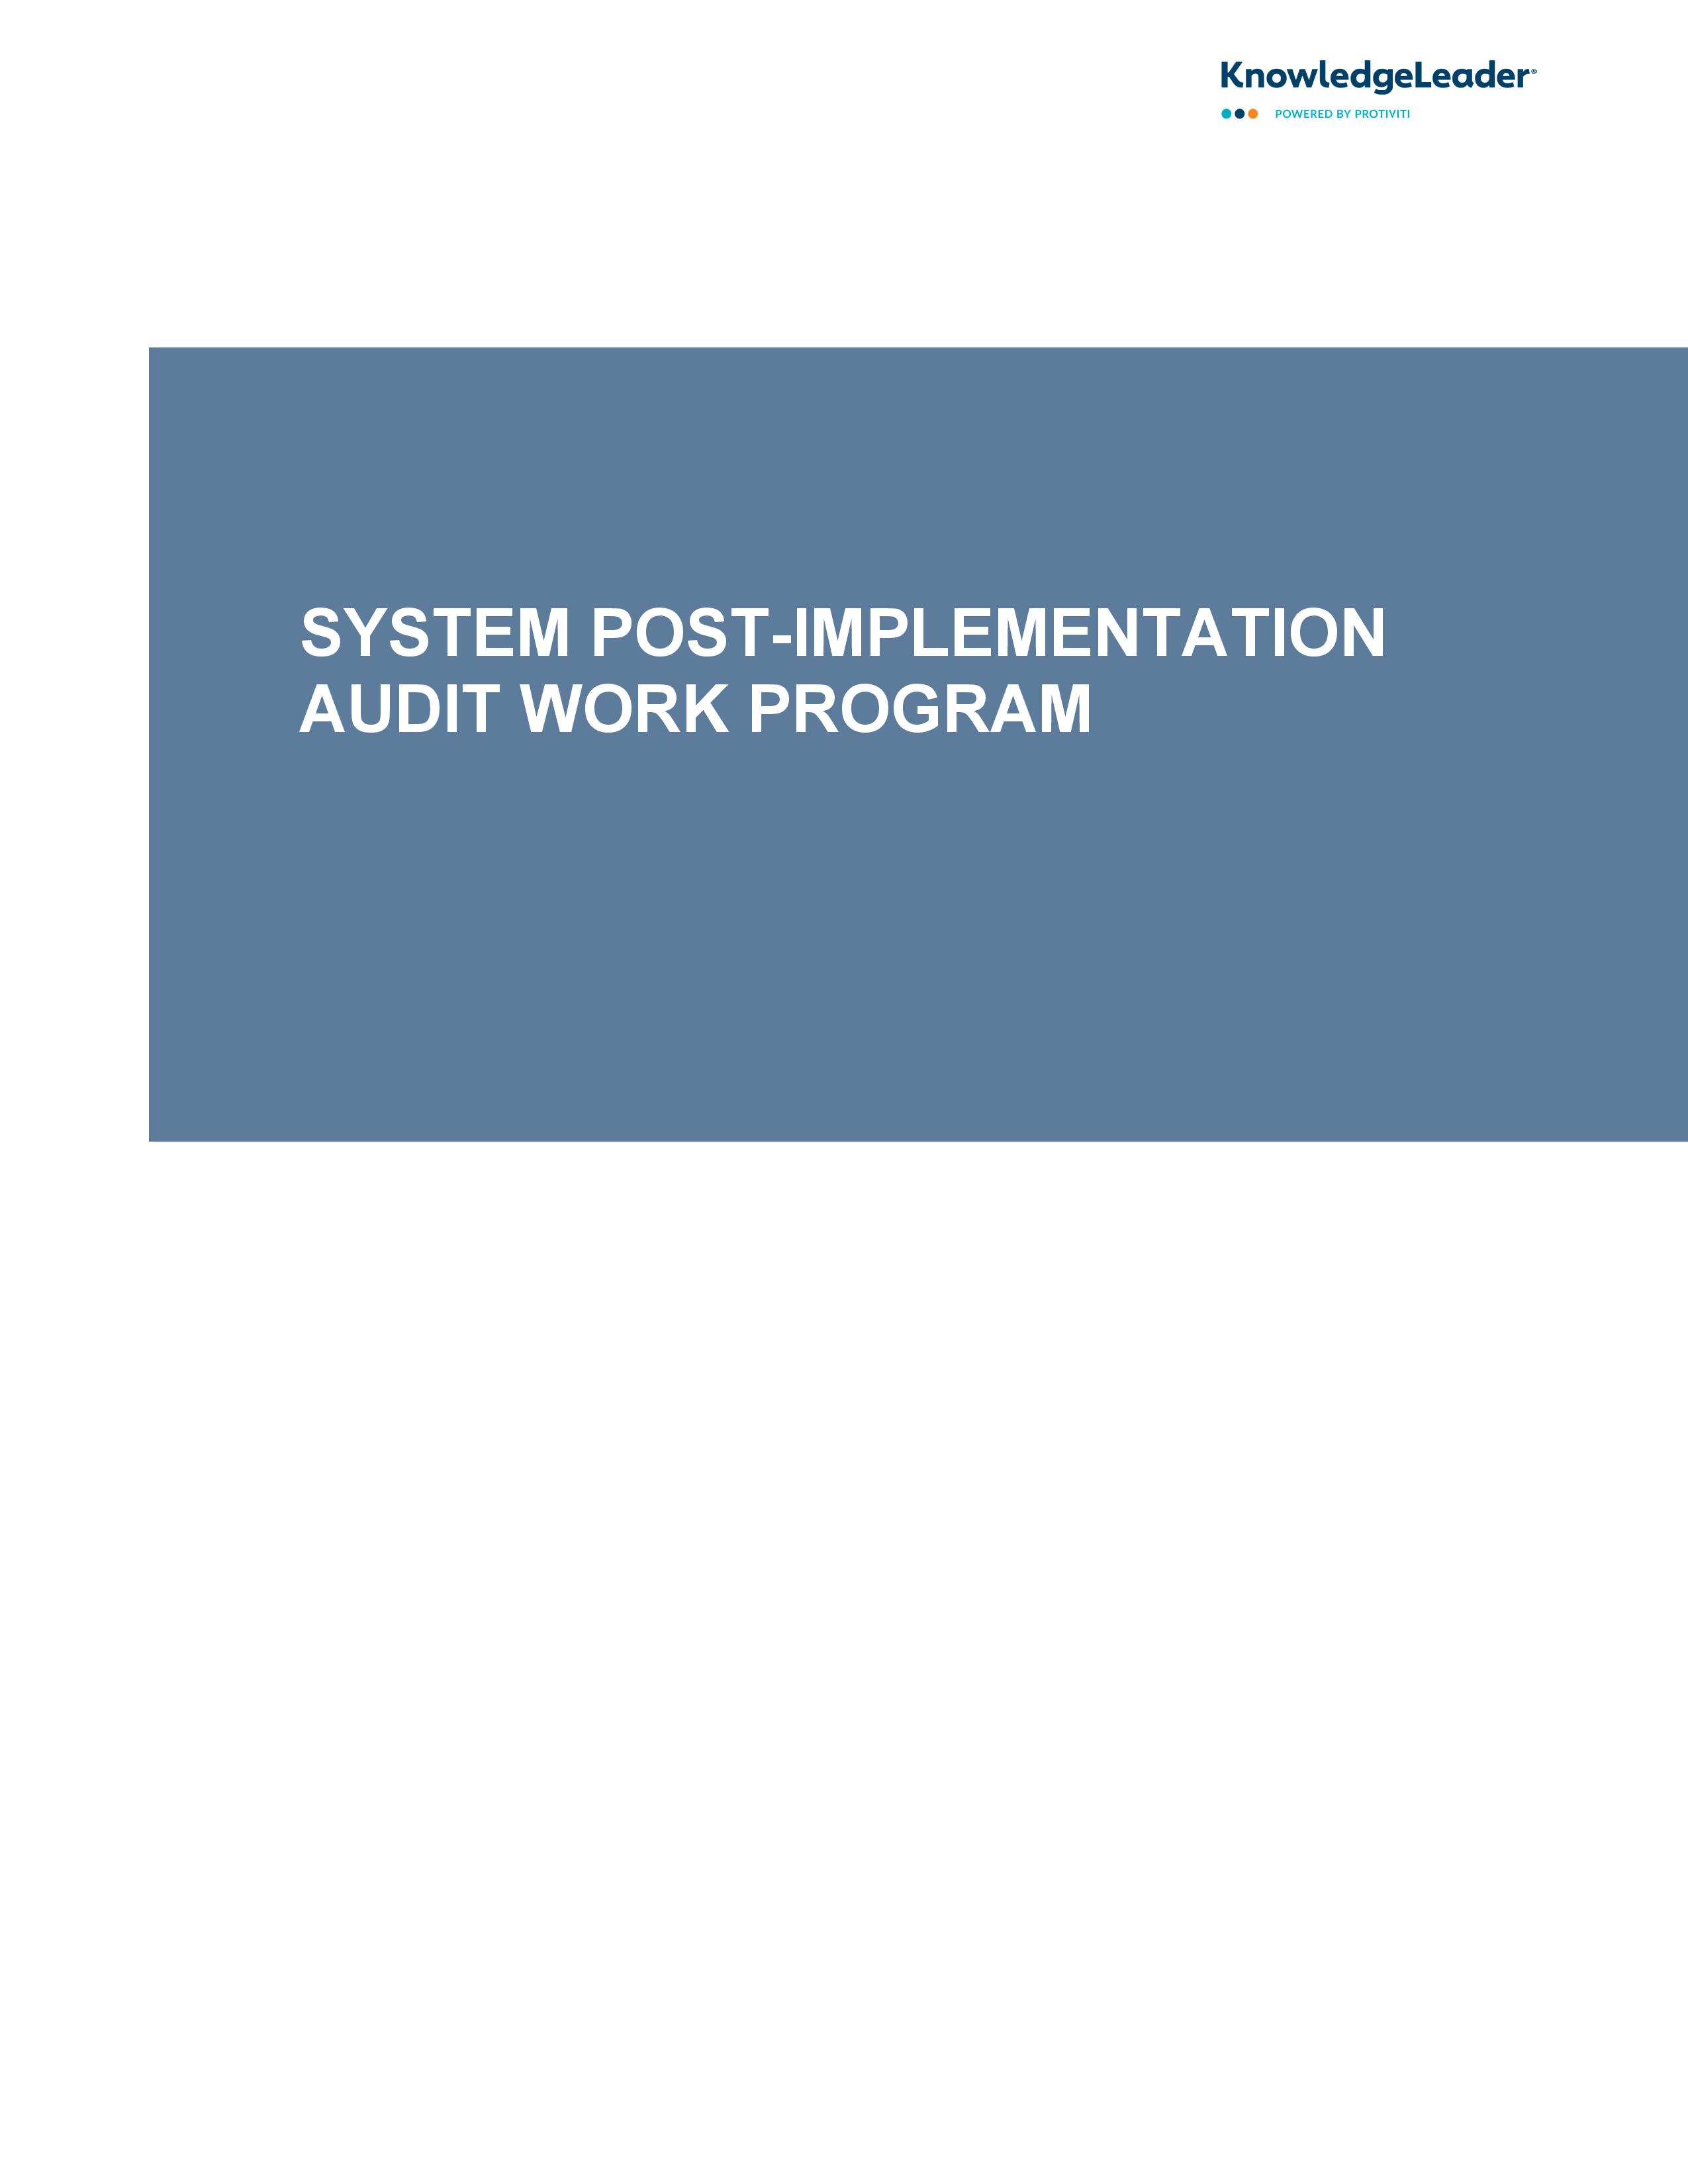 screenshot of the first page of System Post-implementation Audit Work Program